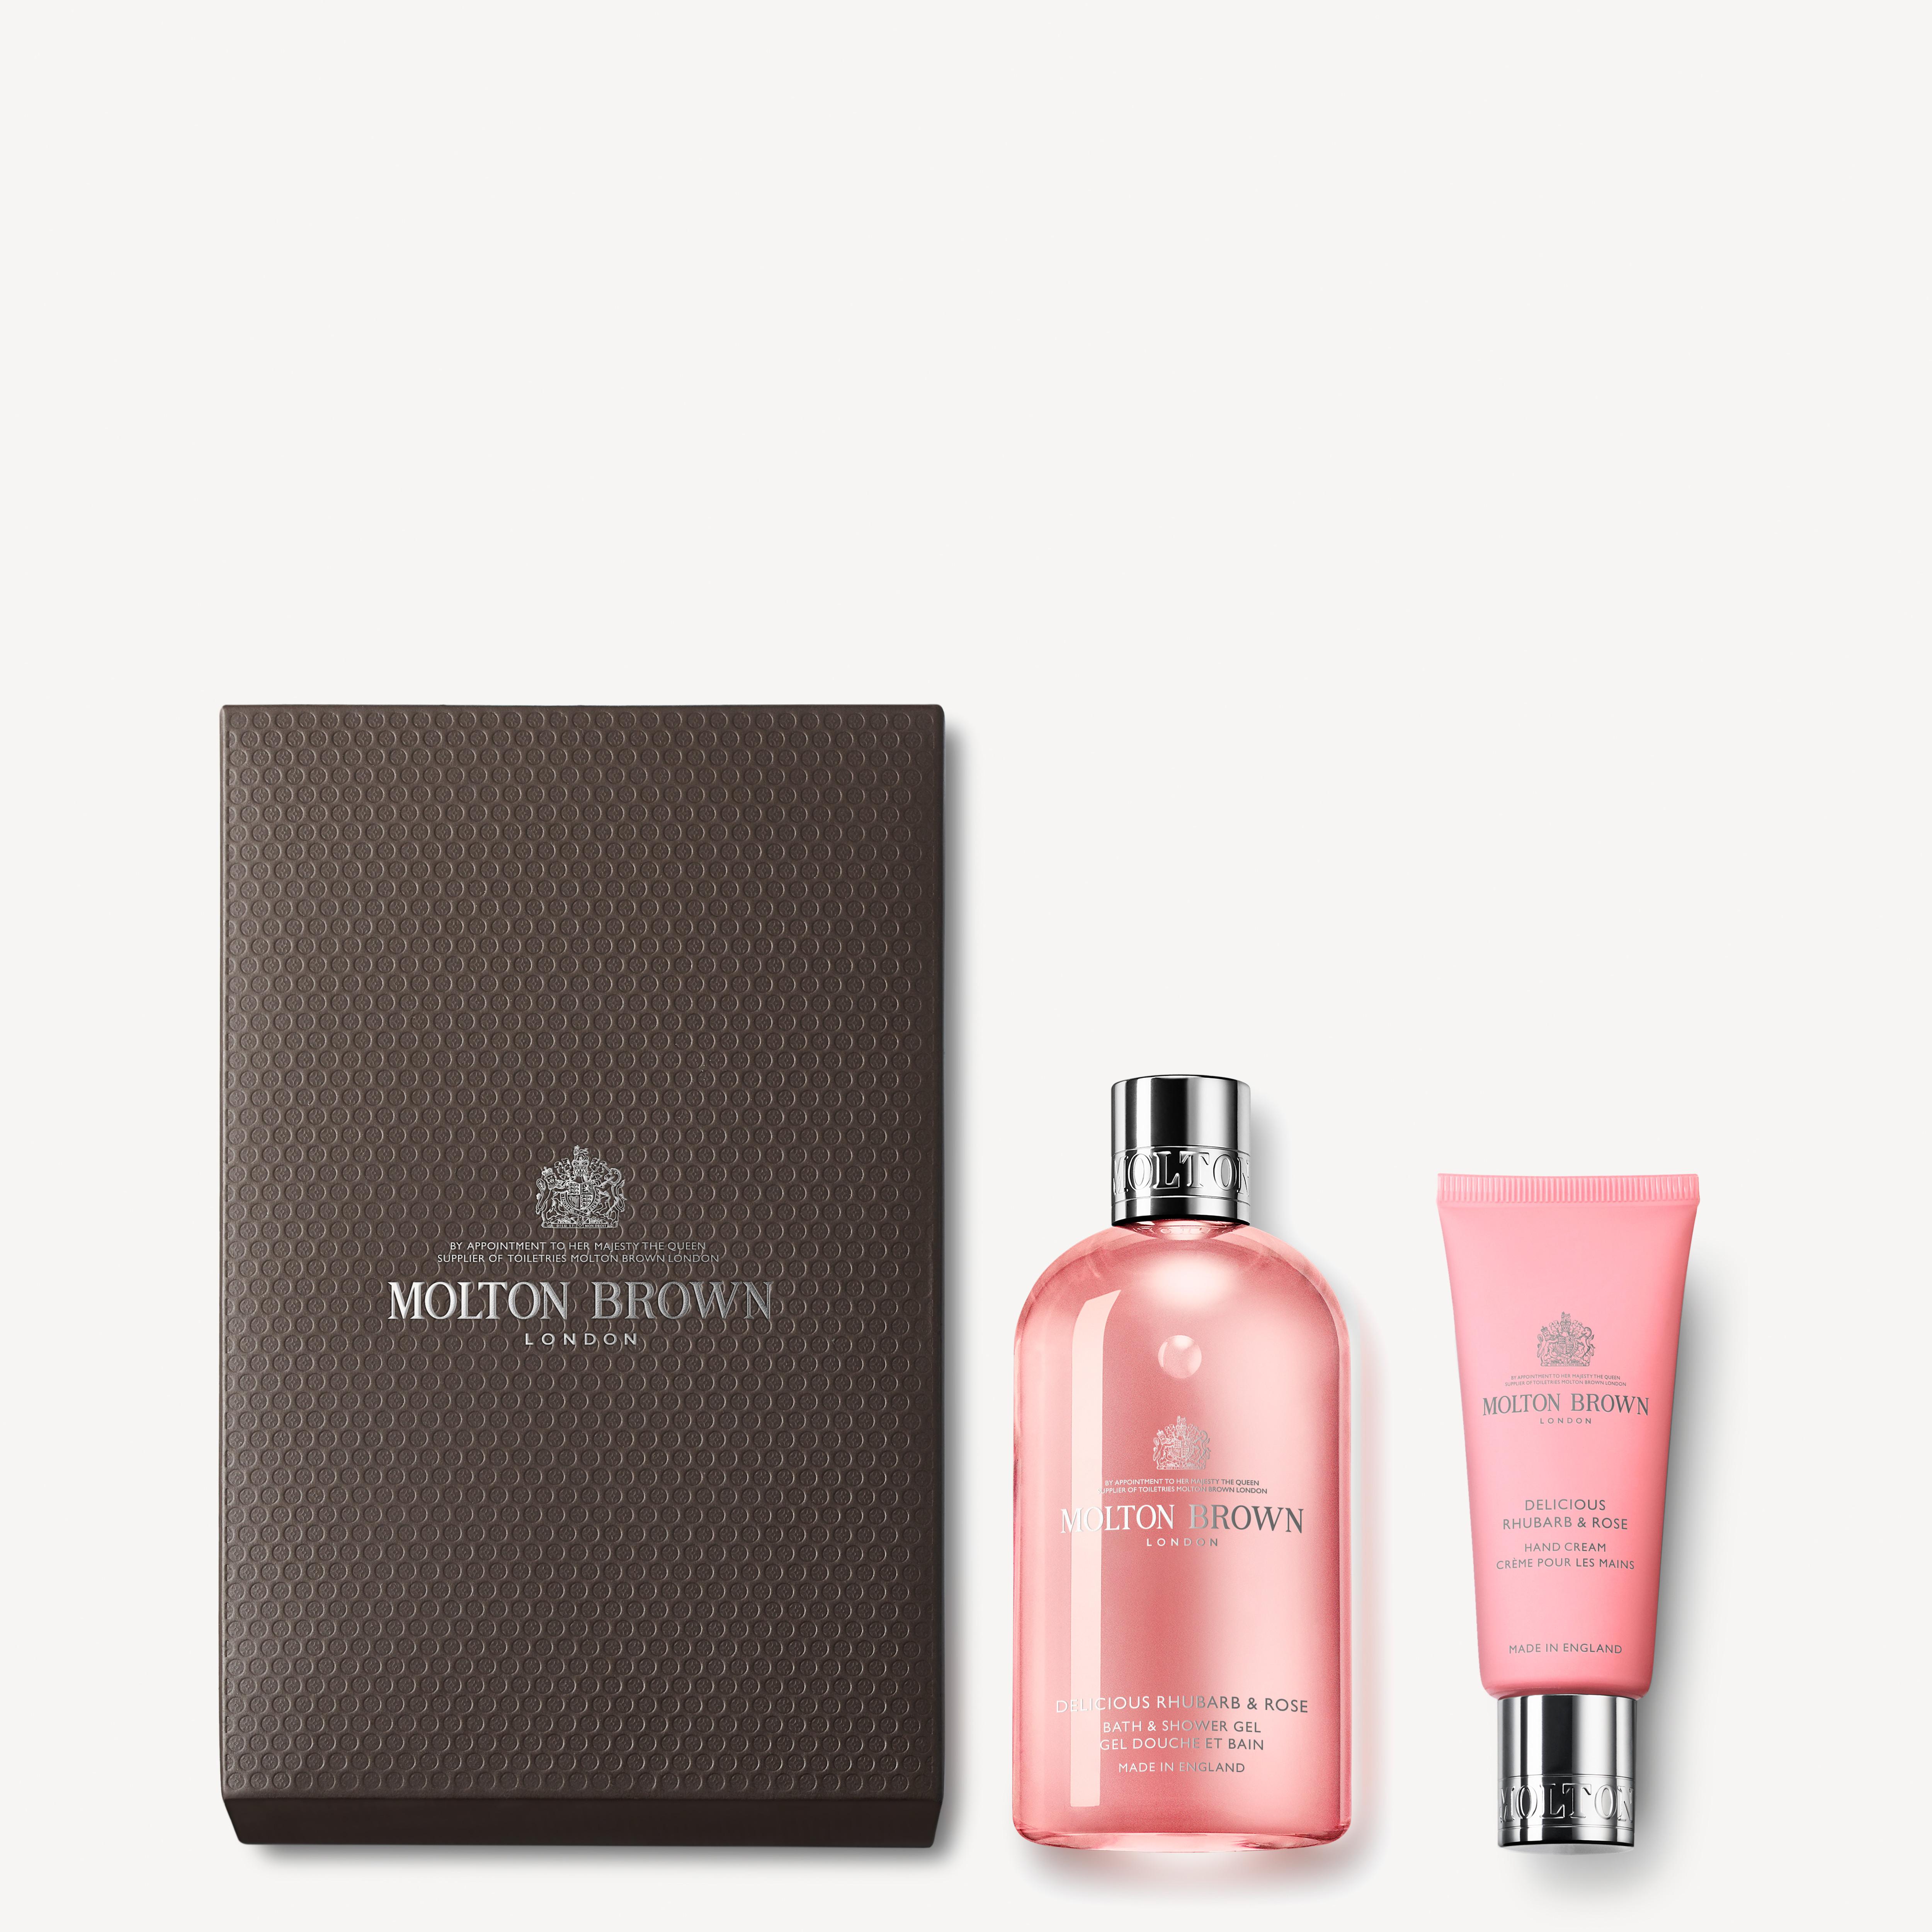 Molton Brown Delicious Rhubarb & Rose Bathing & Hand Gift Set